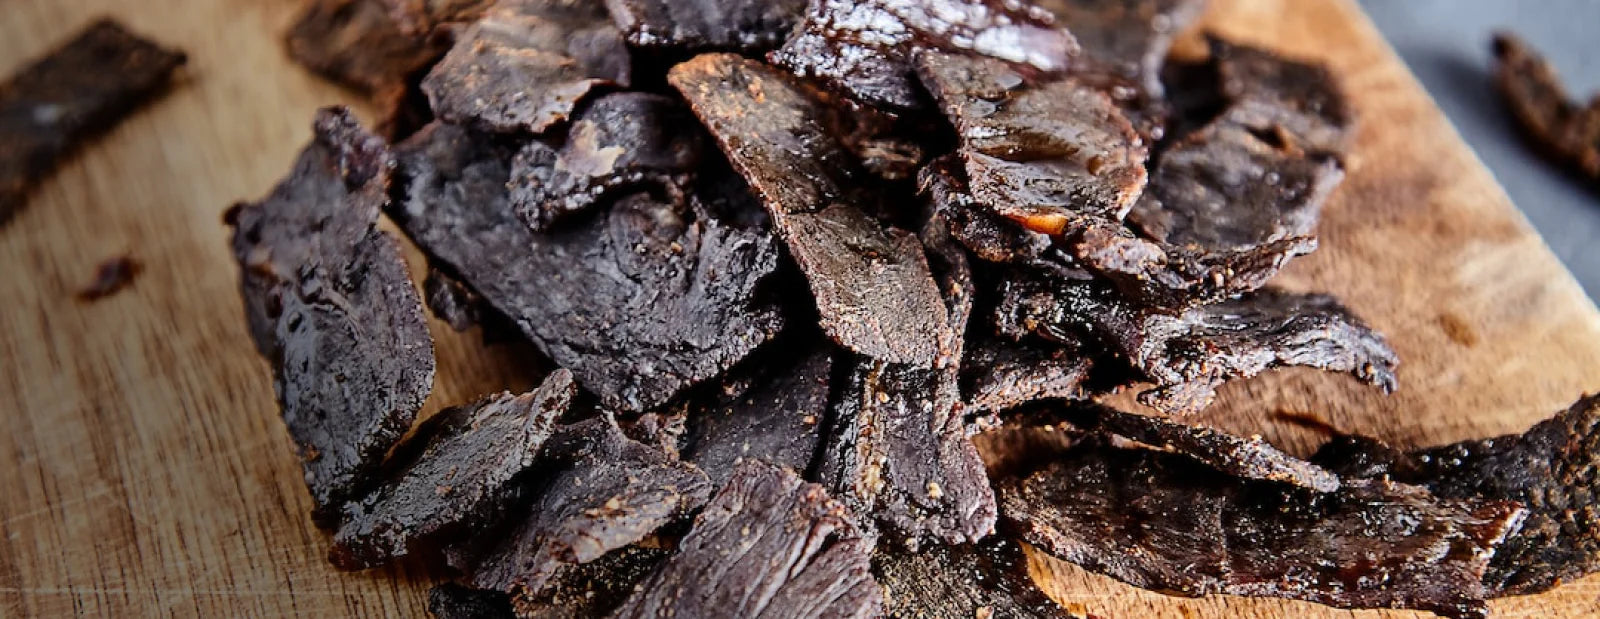 Why is Beef Jerky so Expensive?